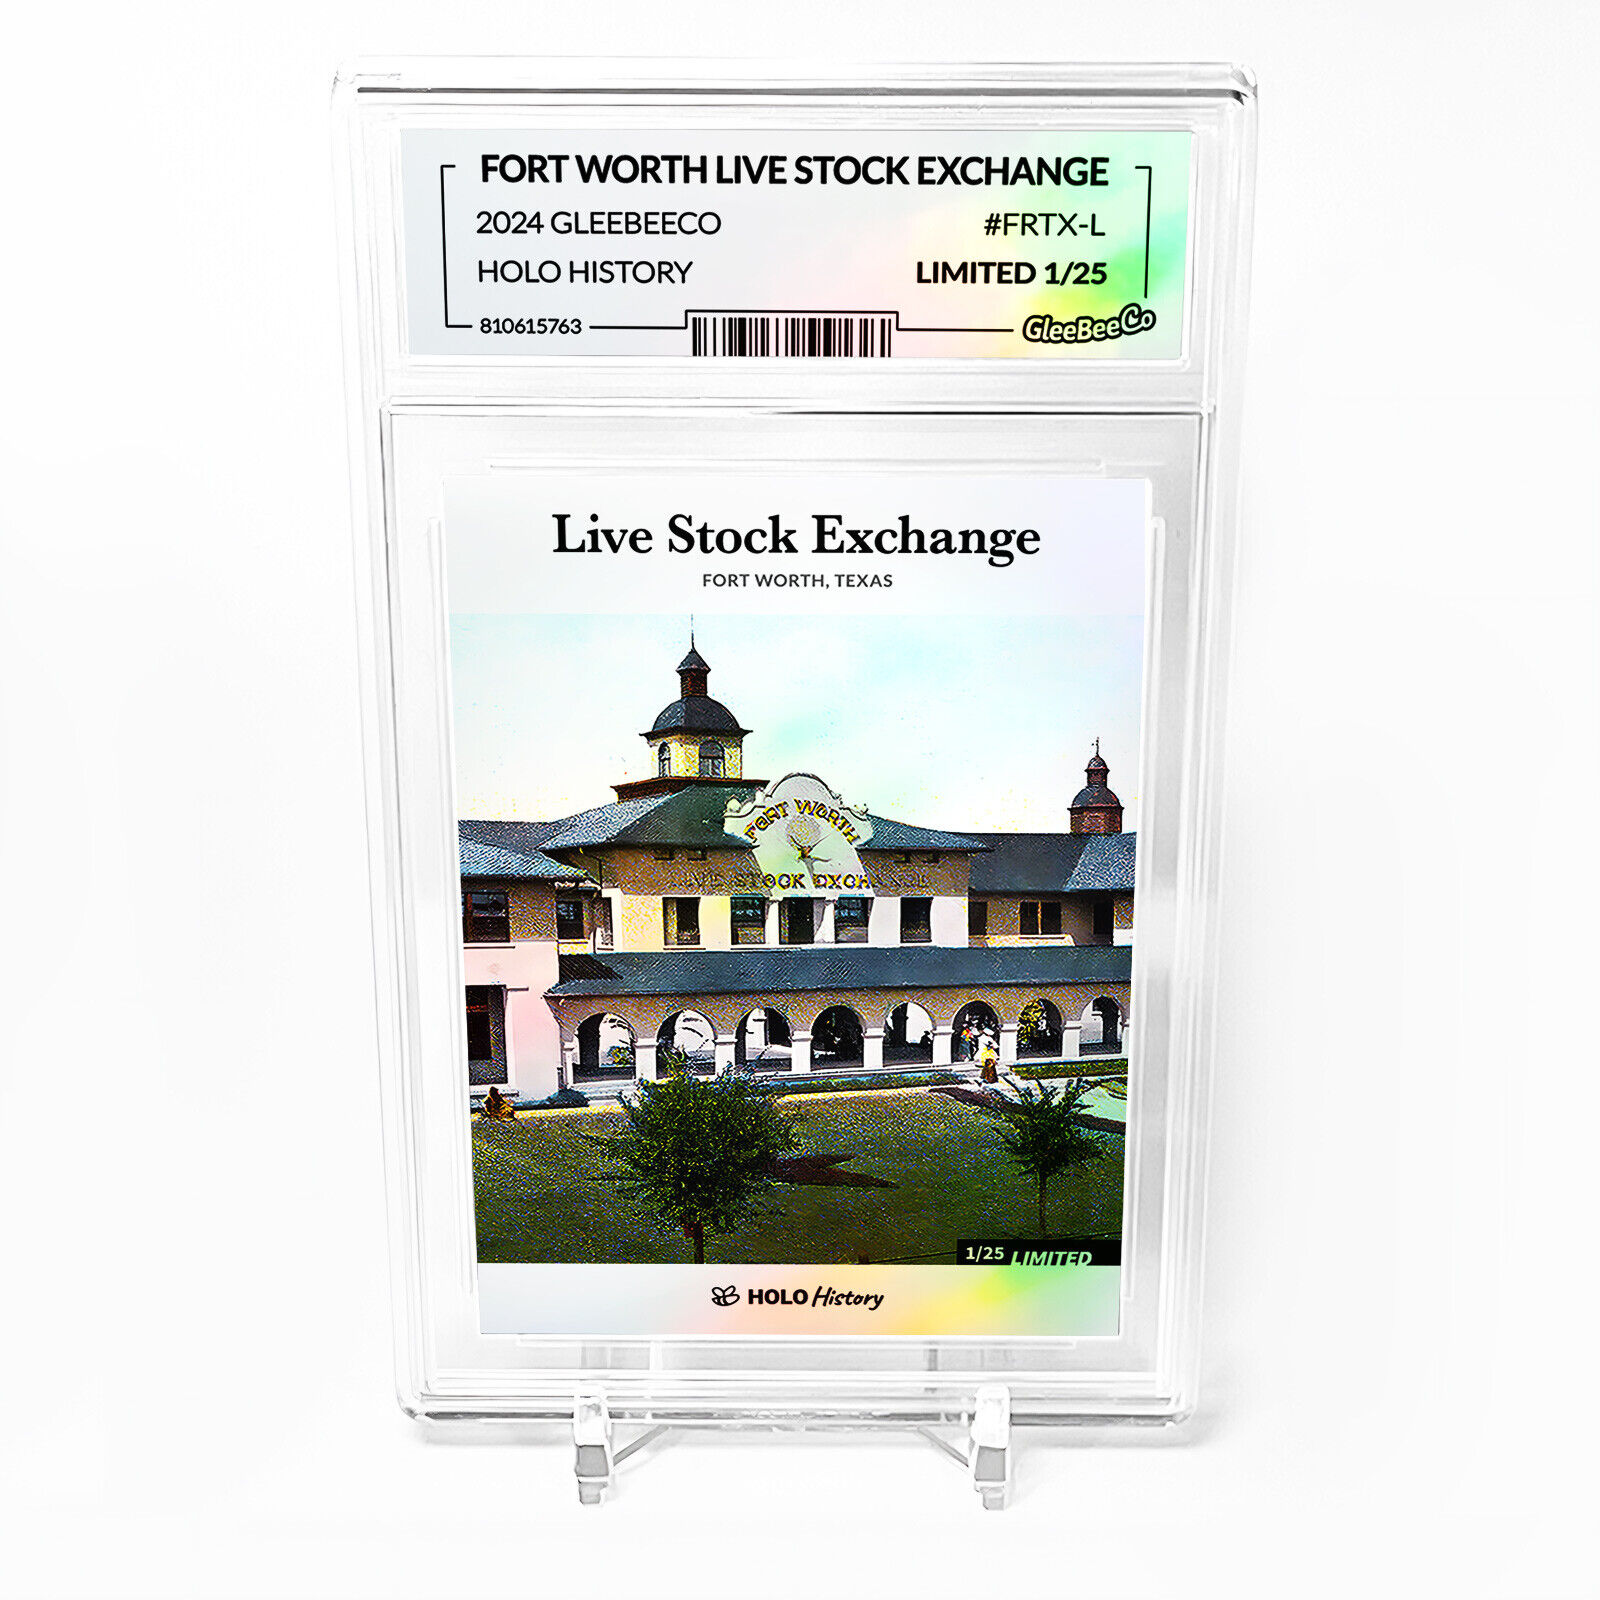 FORT WORTH LIVE STOCK EXCHANGE Card 2024 GleeBeeCo #FRTX-L - Limited Edition /25